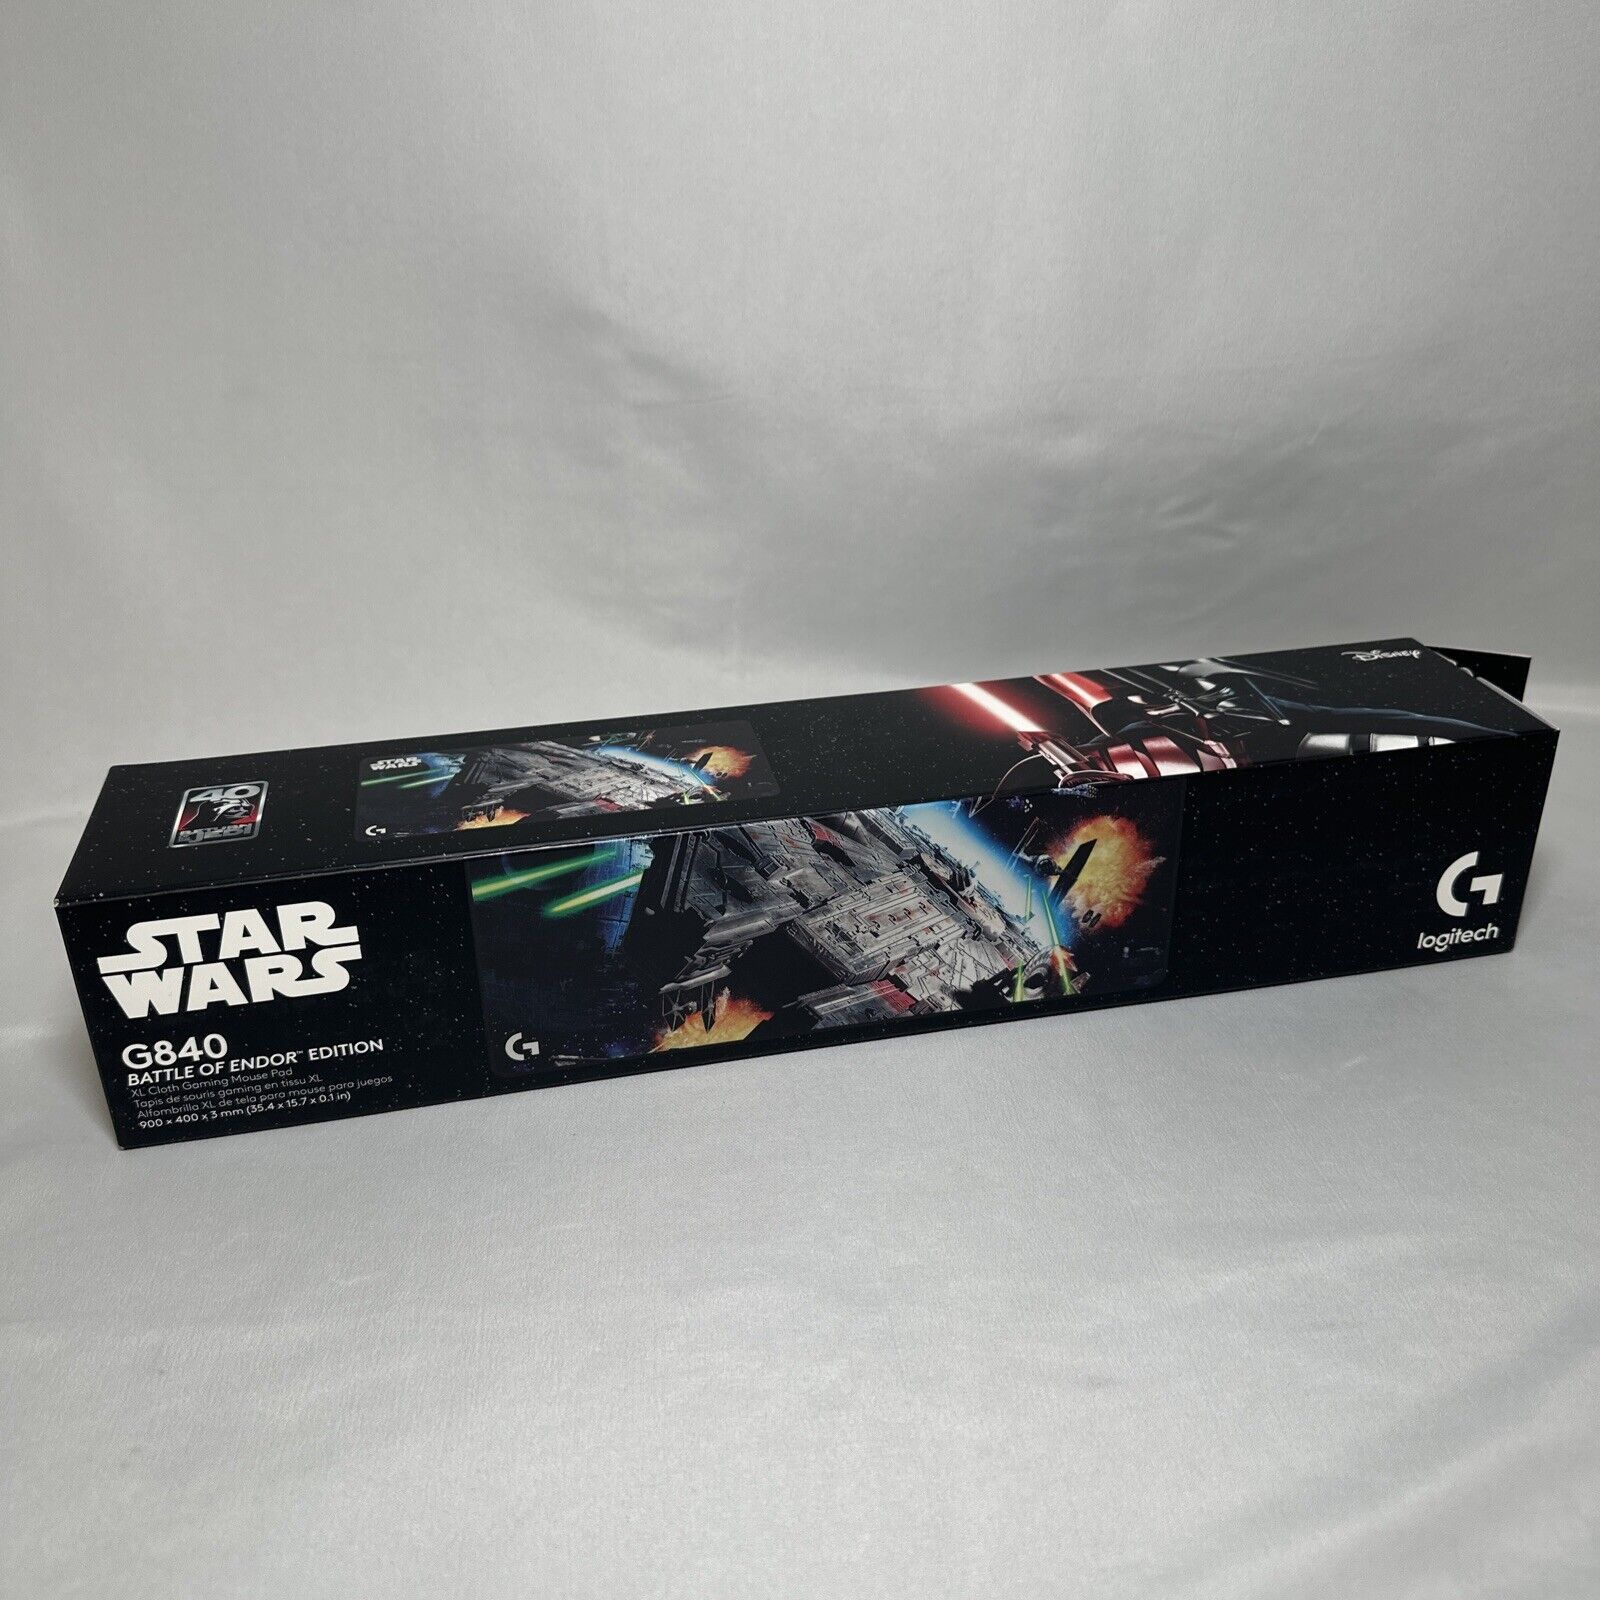 Logitech Star Wars G840 Battle Of Endor Edition Xl Gaming Mouse Pad - SEALED